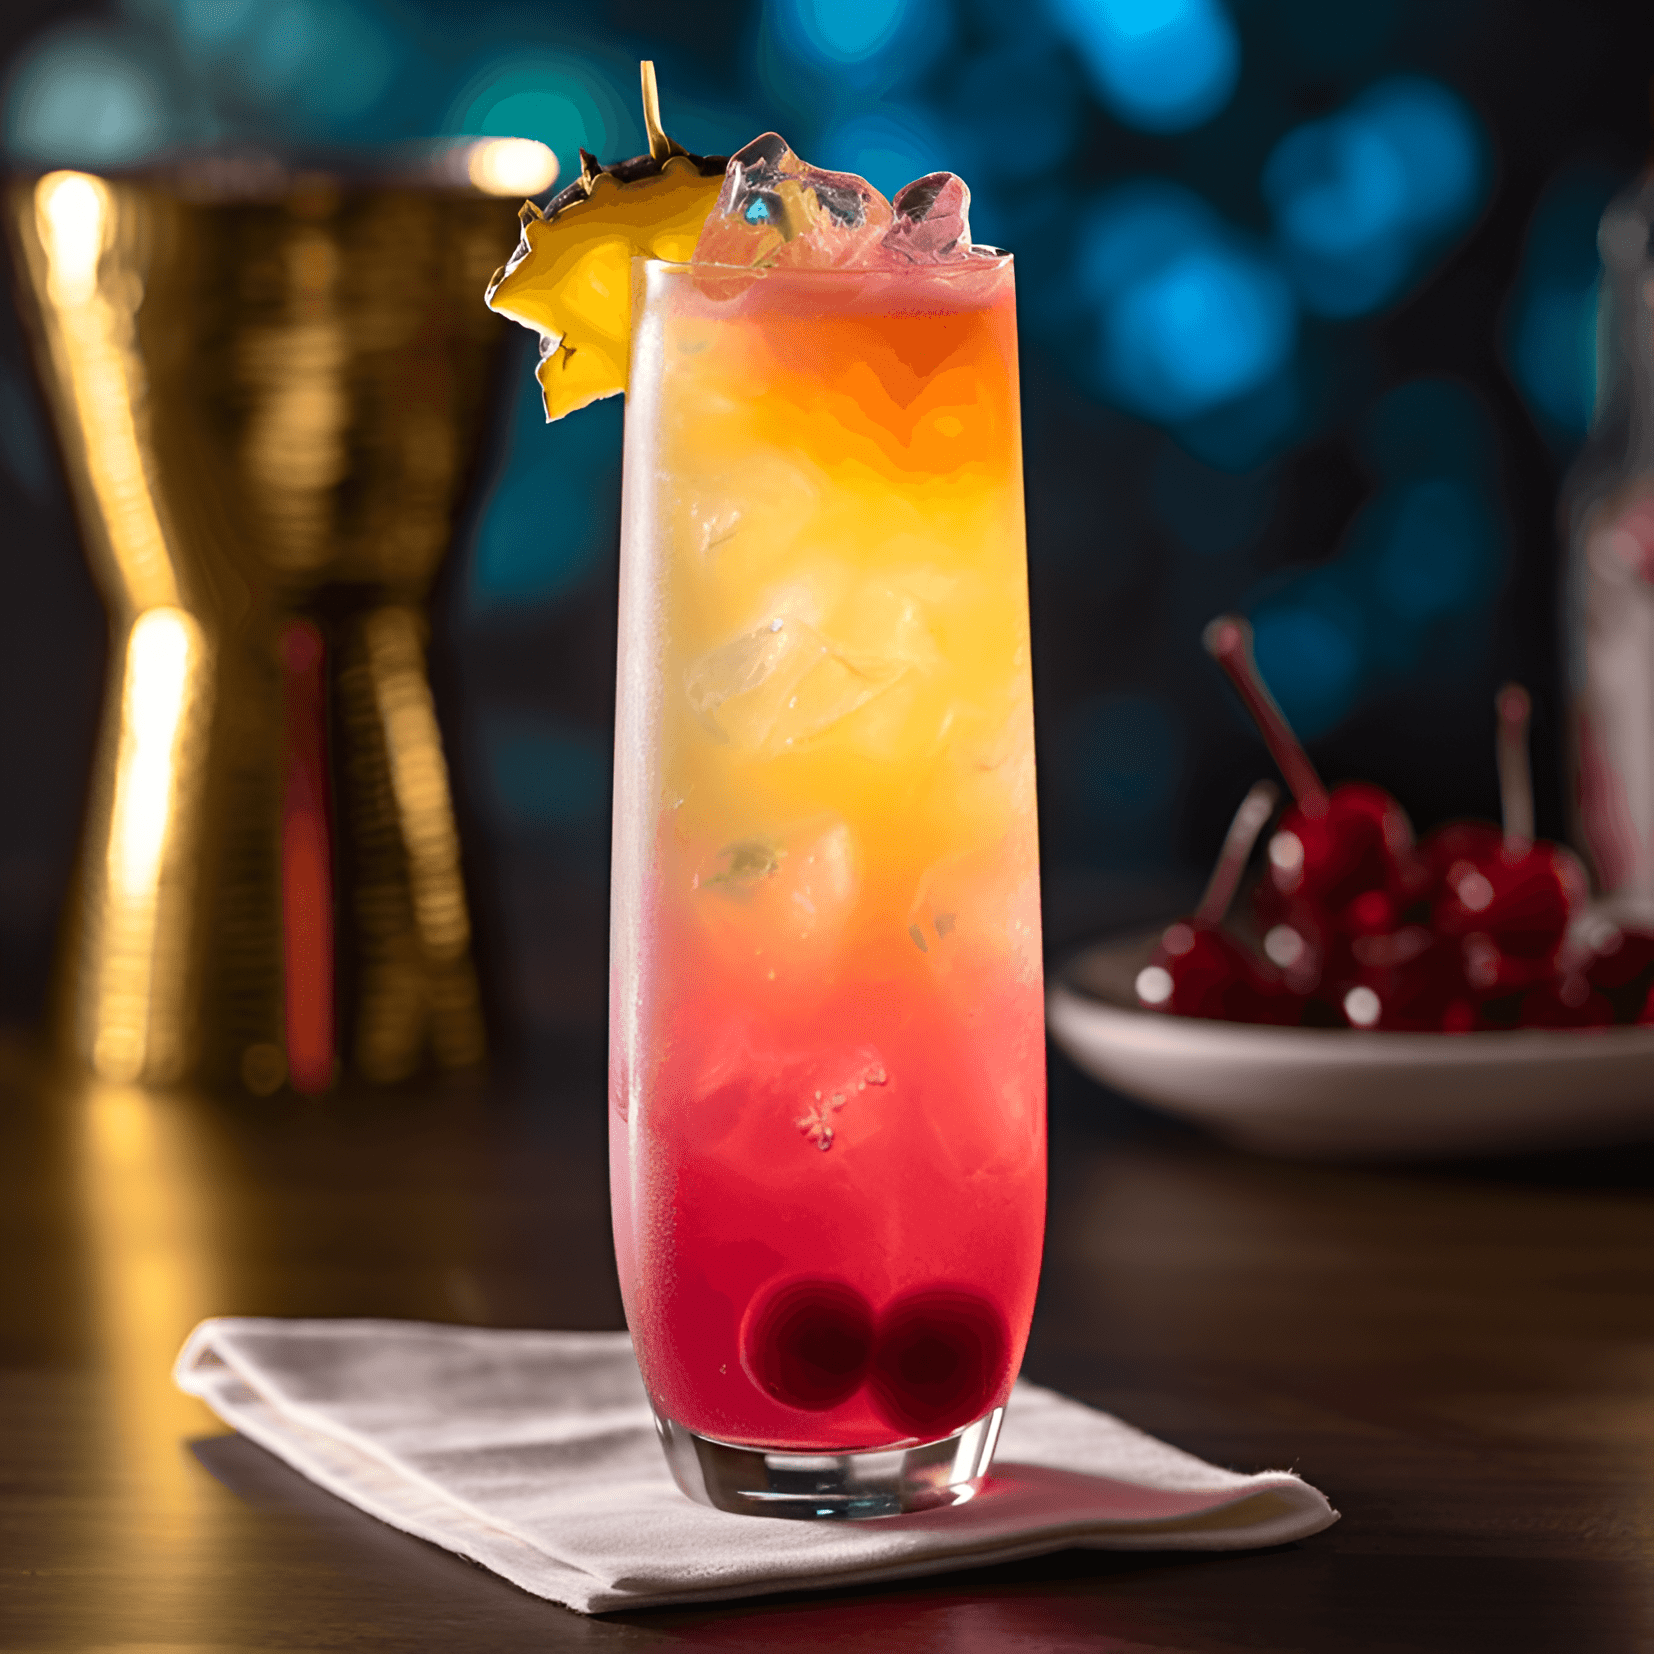 The Cinderella cocktail offers a delightful mix of sweet and sour flavors, with a light and refreshing taste. The combination of fruit juices creates a tropical sensation, while the ginger ale adds a subtle fizziness.